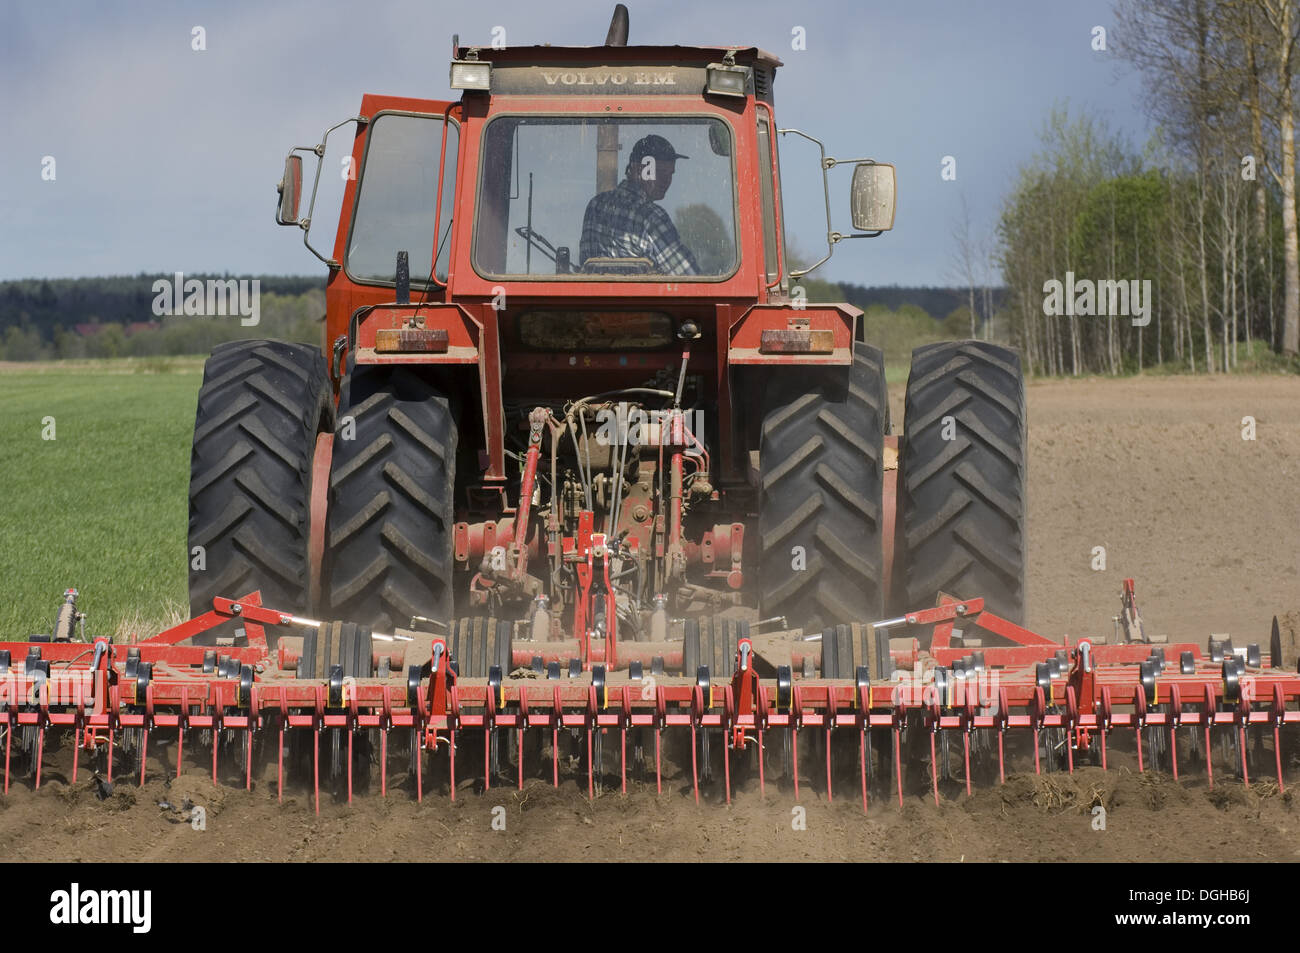 Volvo tractor pulling harrows, cultivating arable field, Sweden Stock Photo